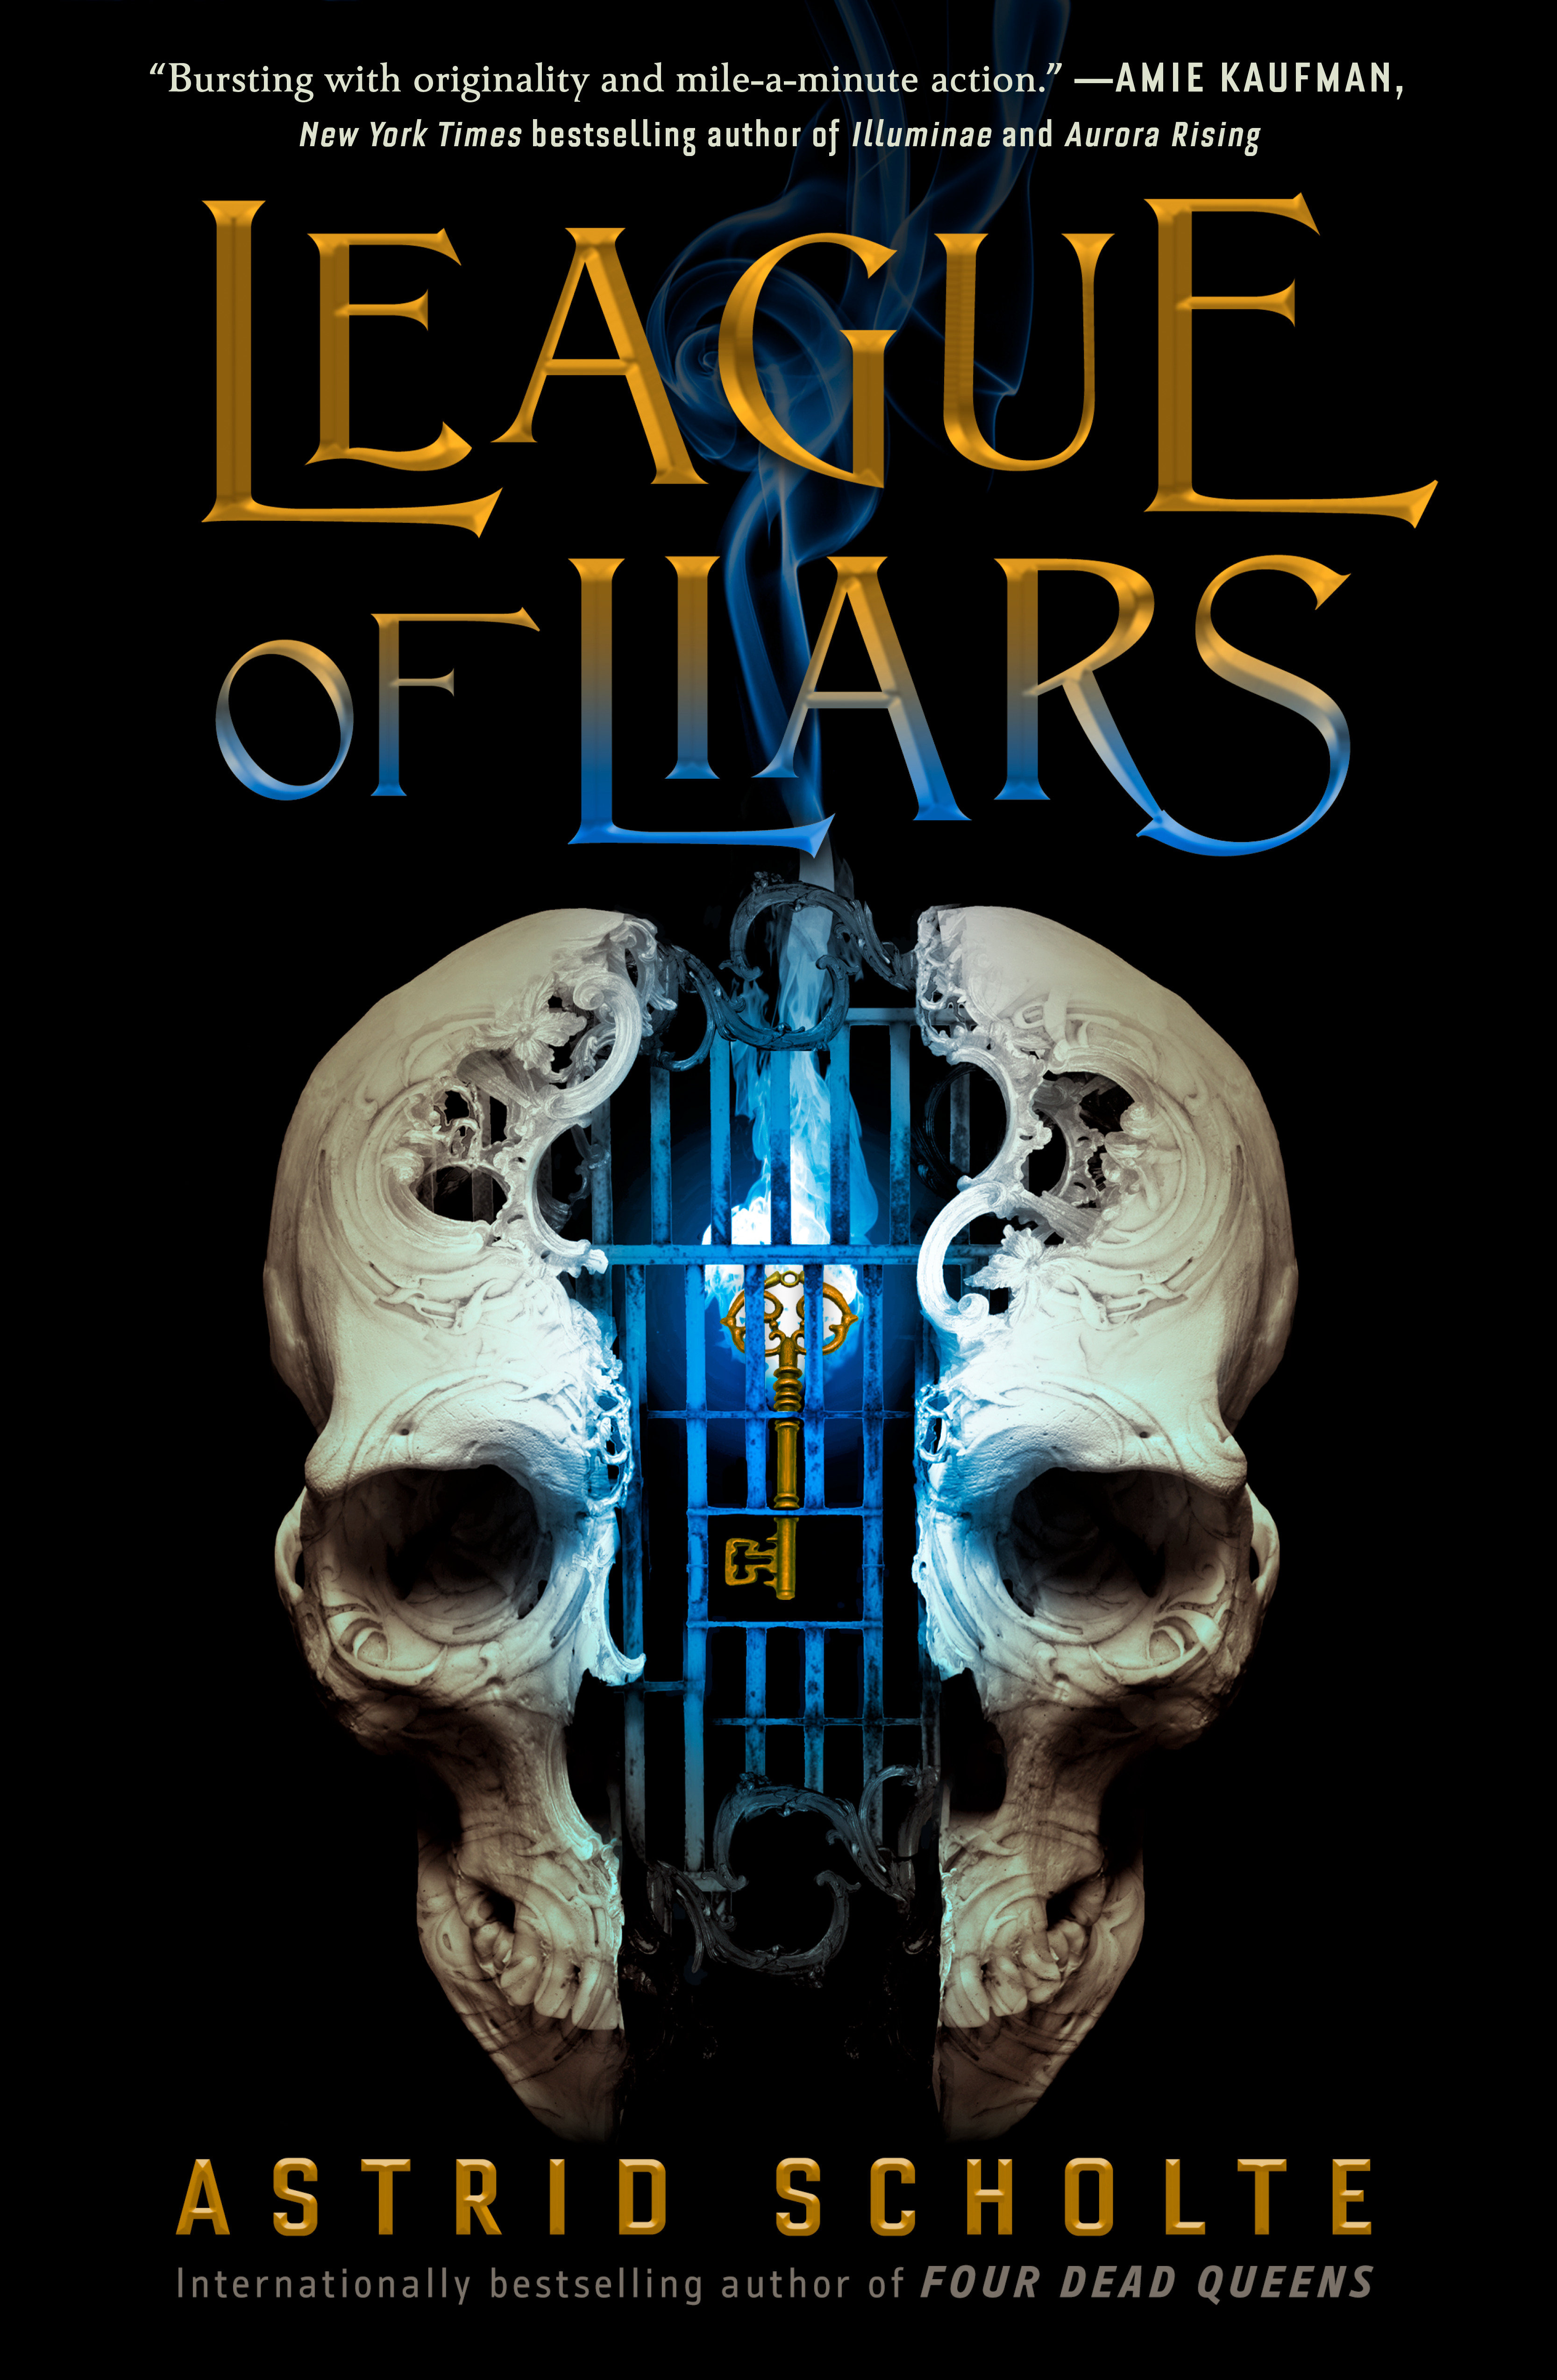 League Of Liars (Hardcover Book)